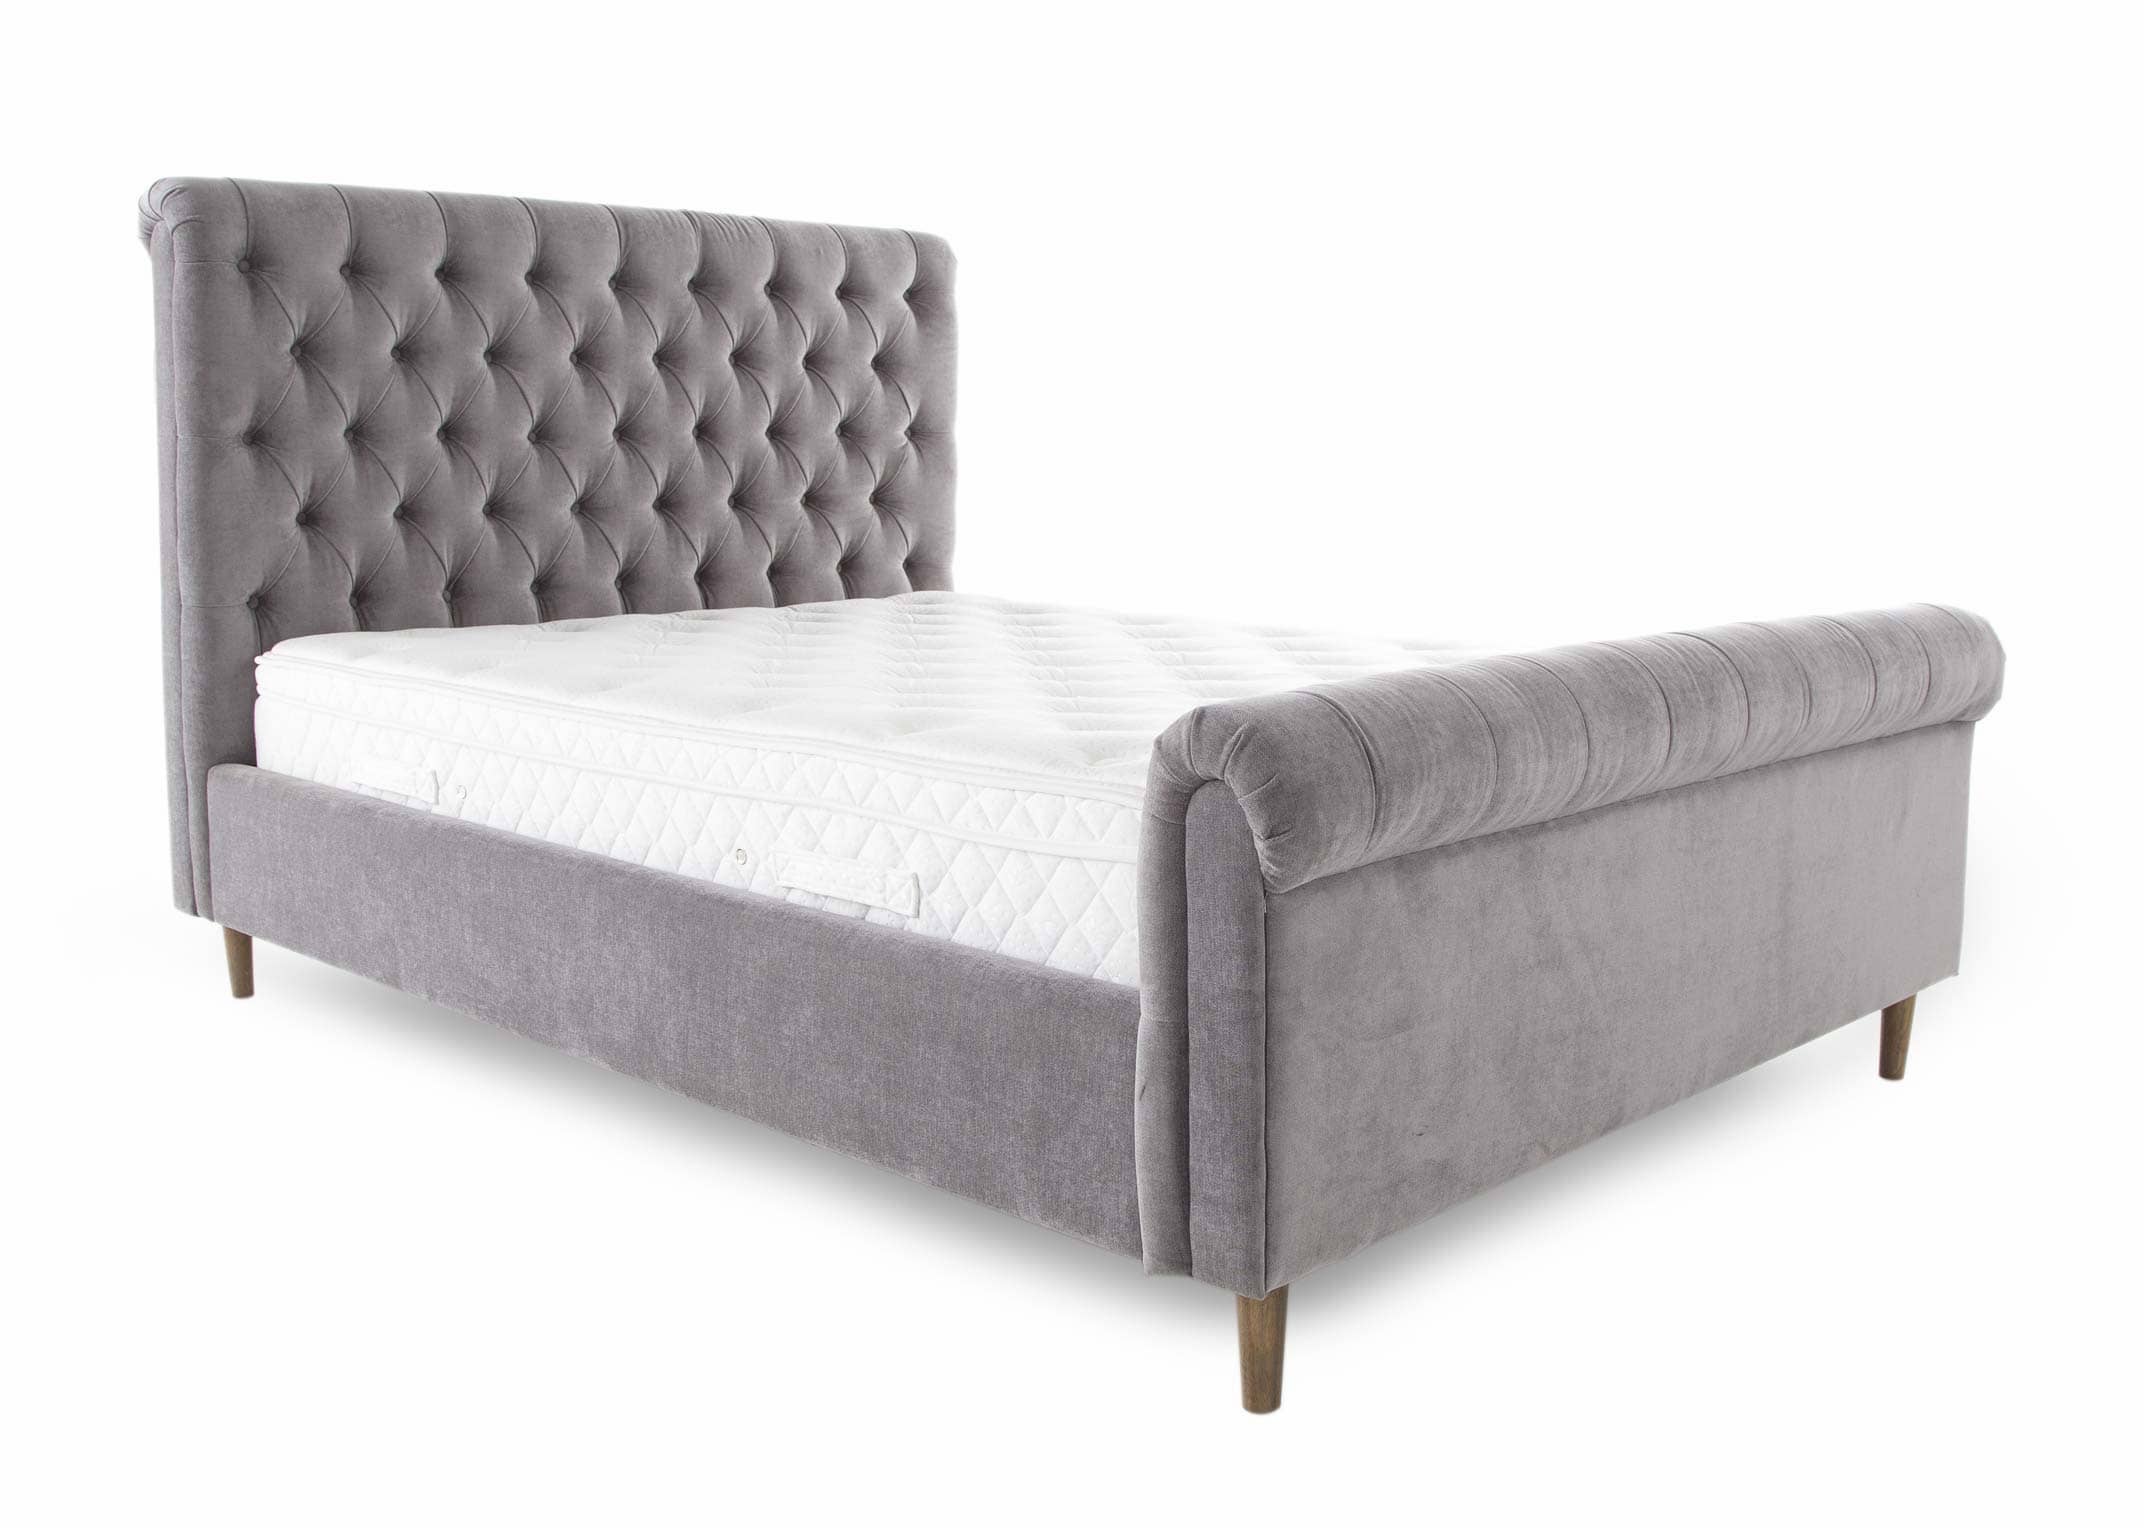 King Size 5ft Grey Fabric Bed Frame, Cloth Bed Frame